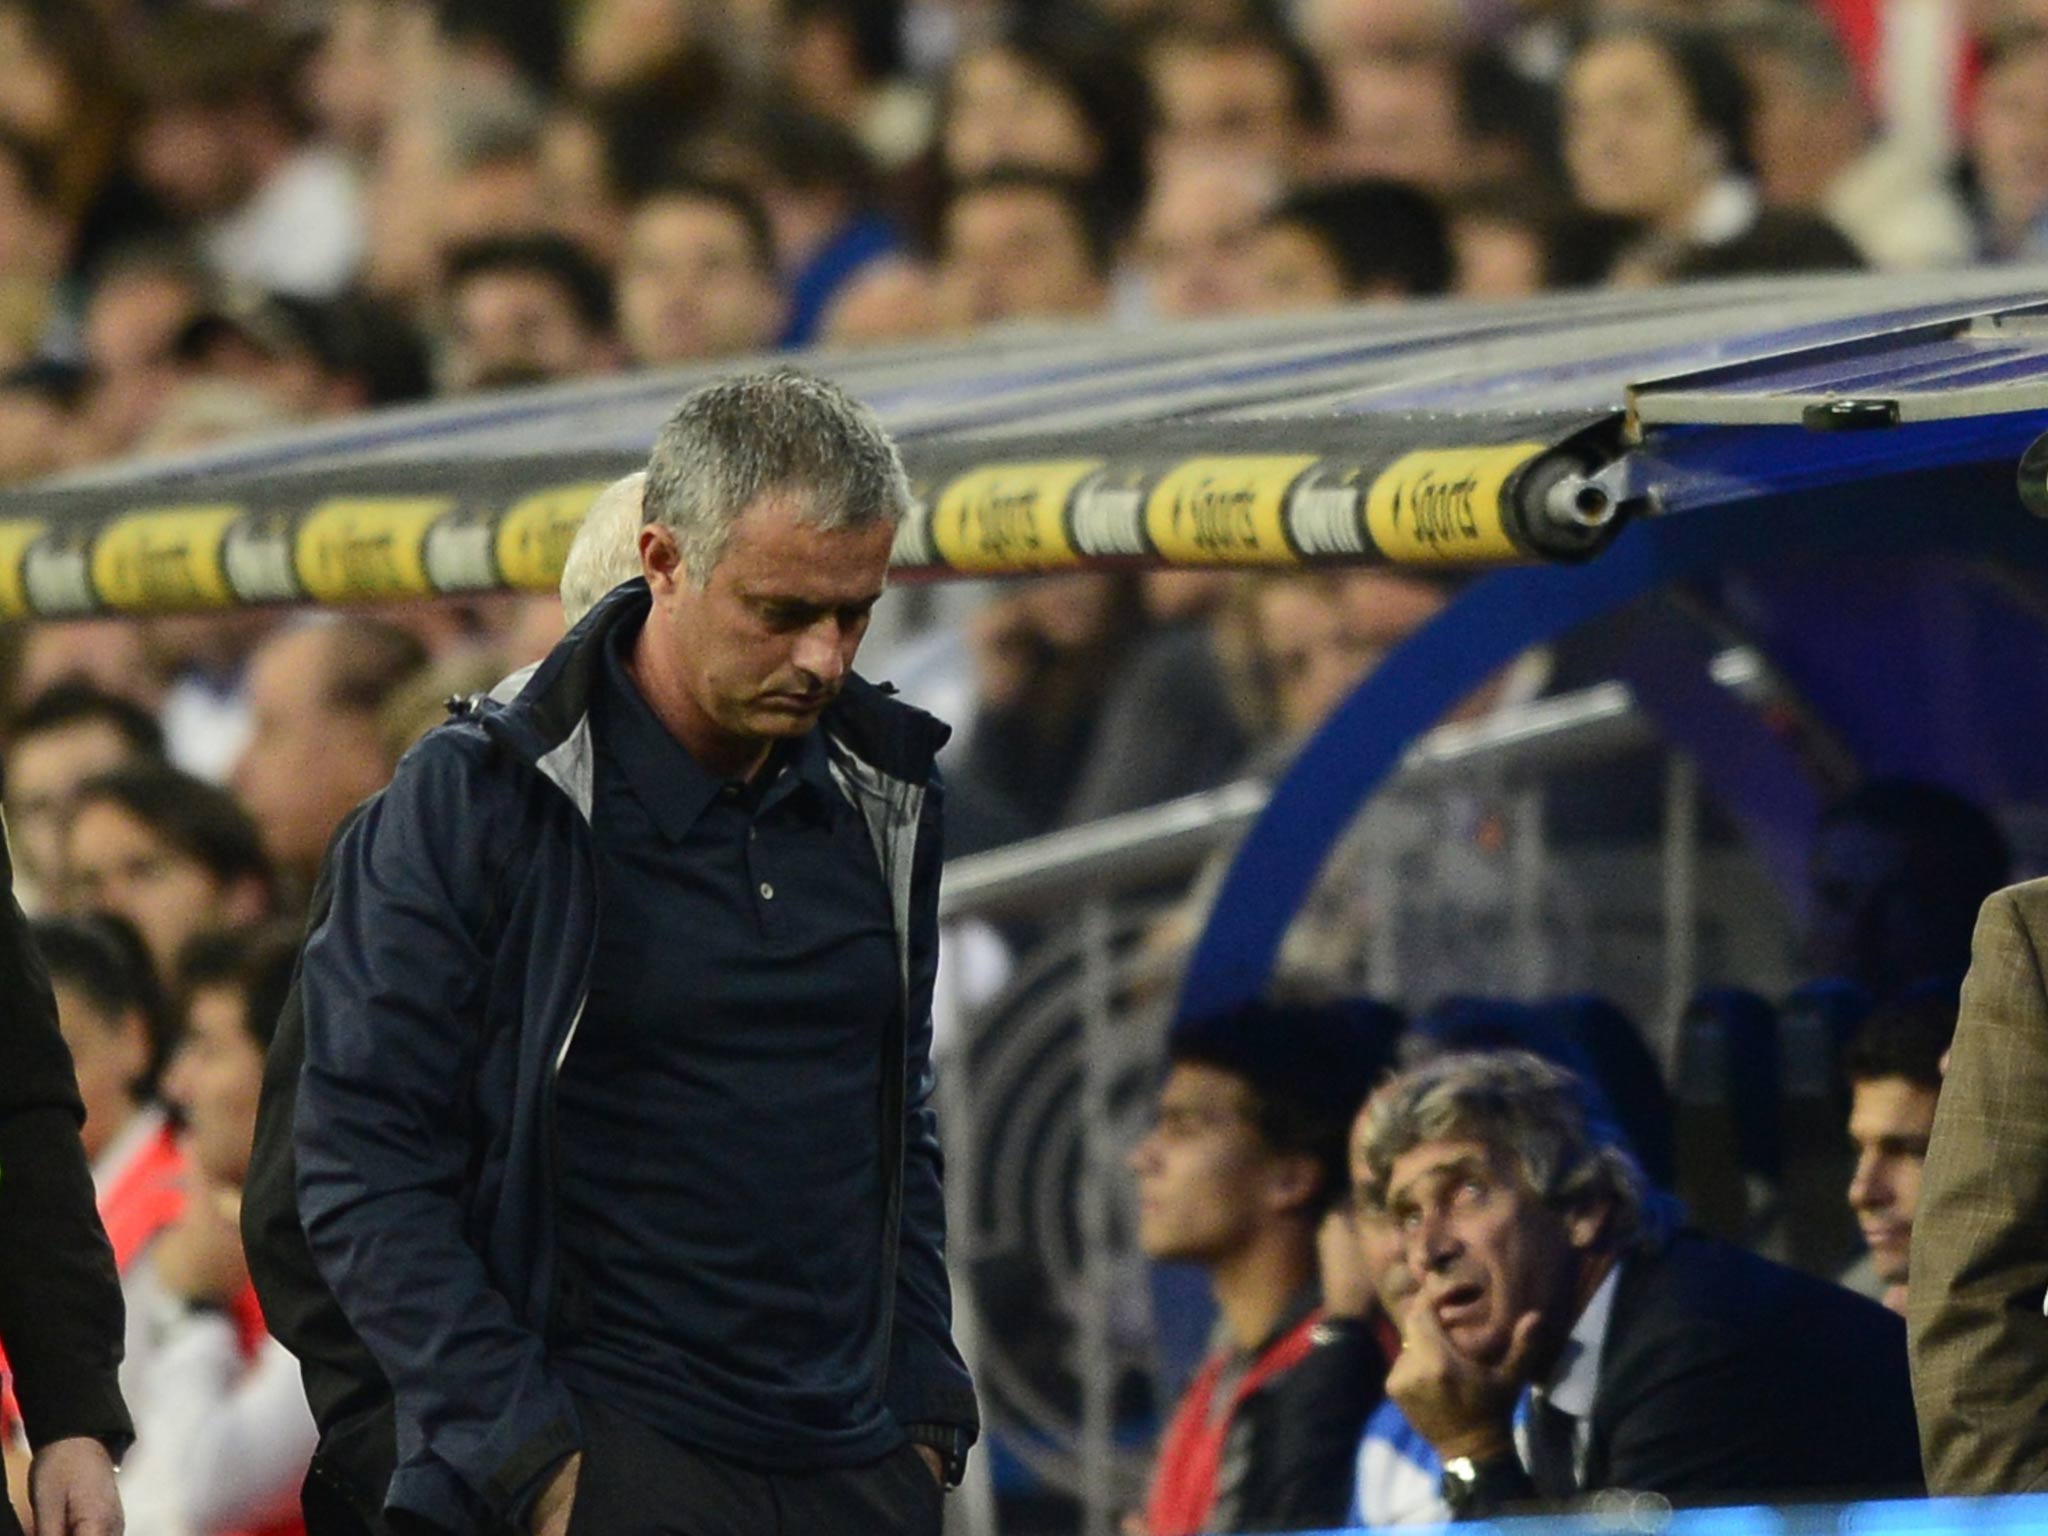 Jose Mourinho pictured during his side's 6-2 win over Malaga